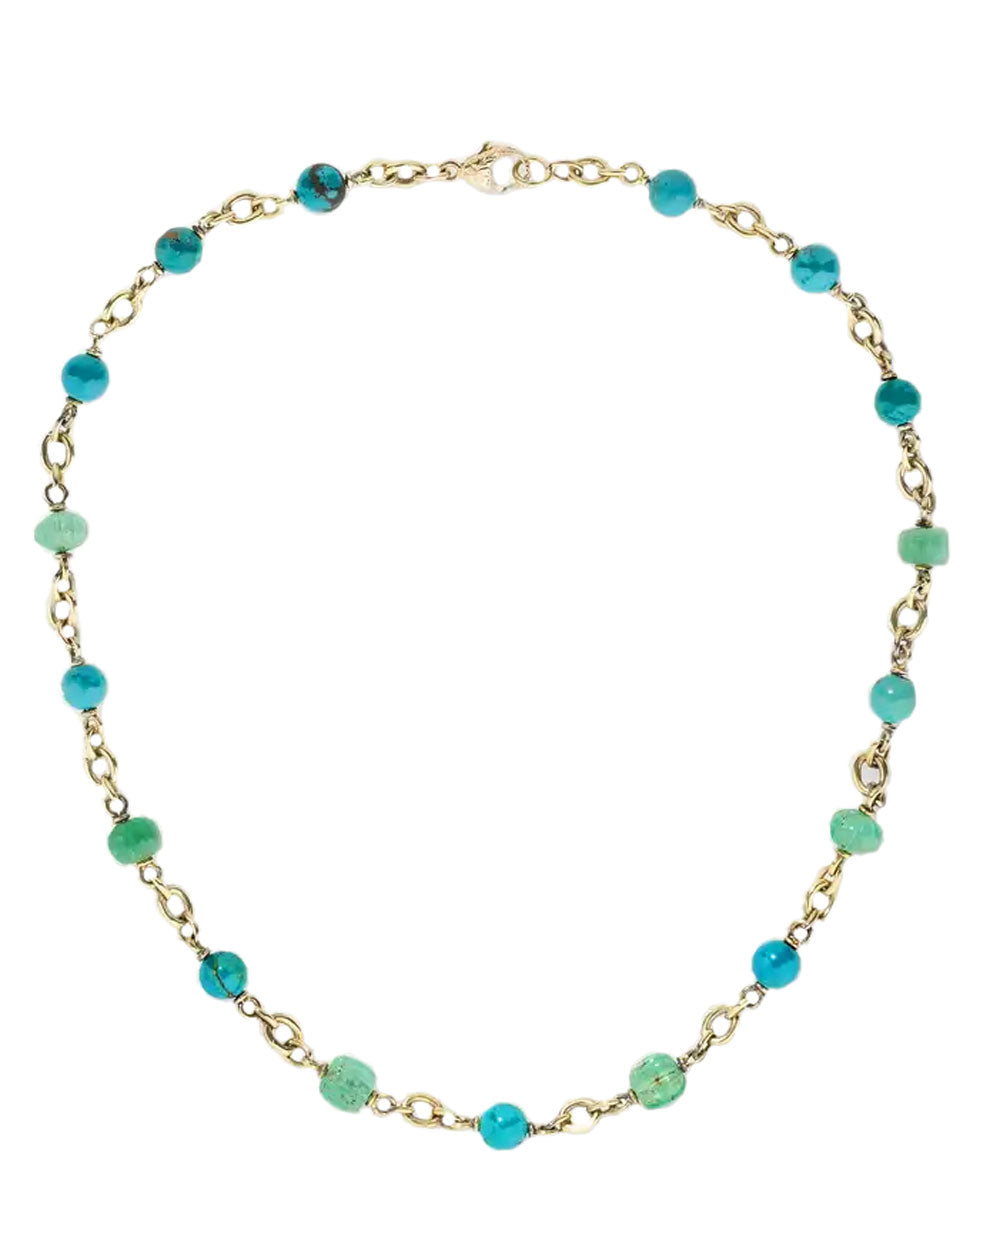 Emerald and Turquoise Necklace